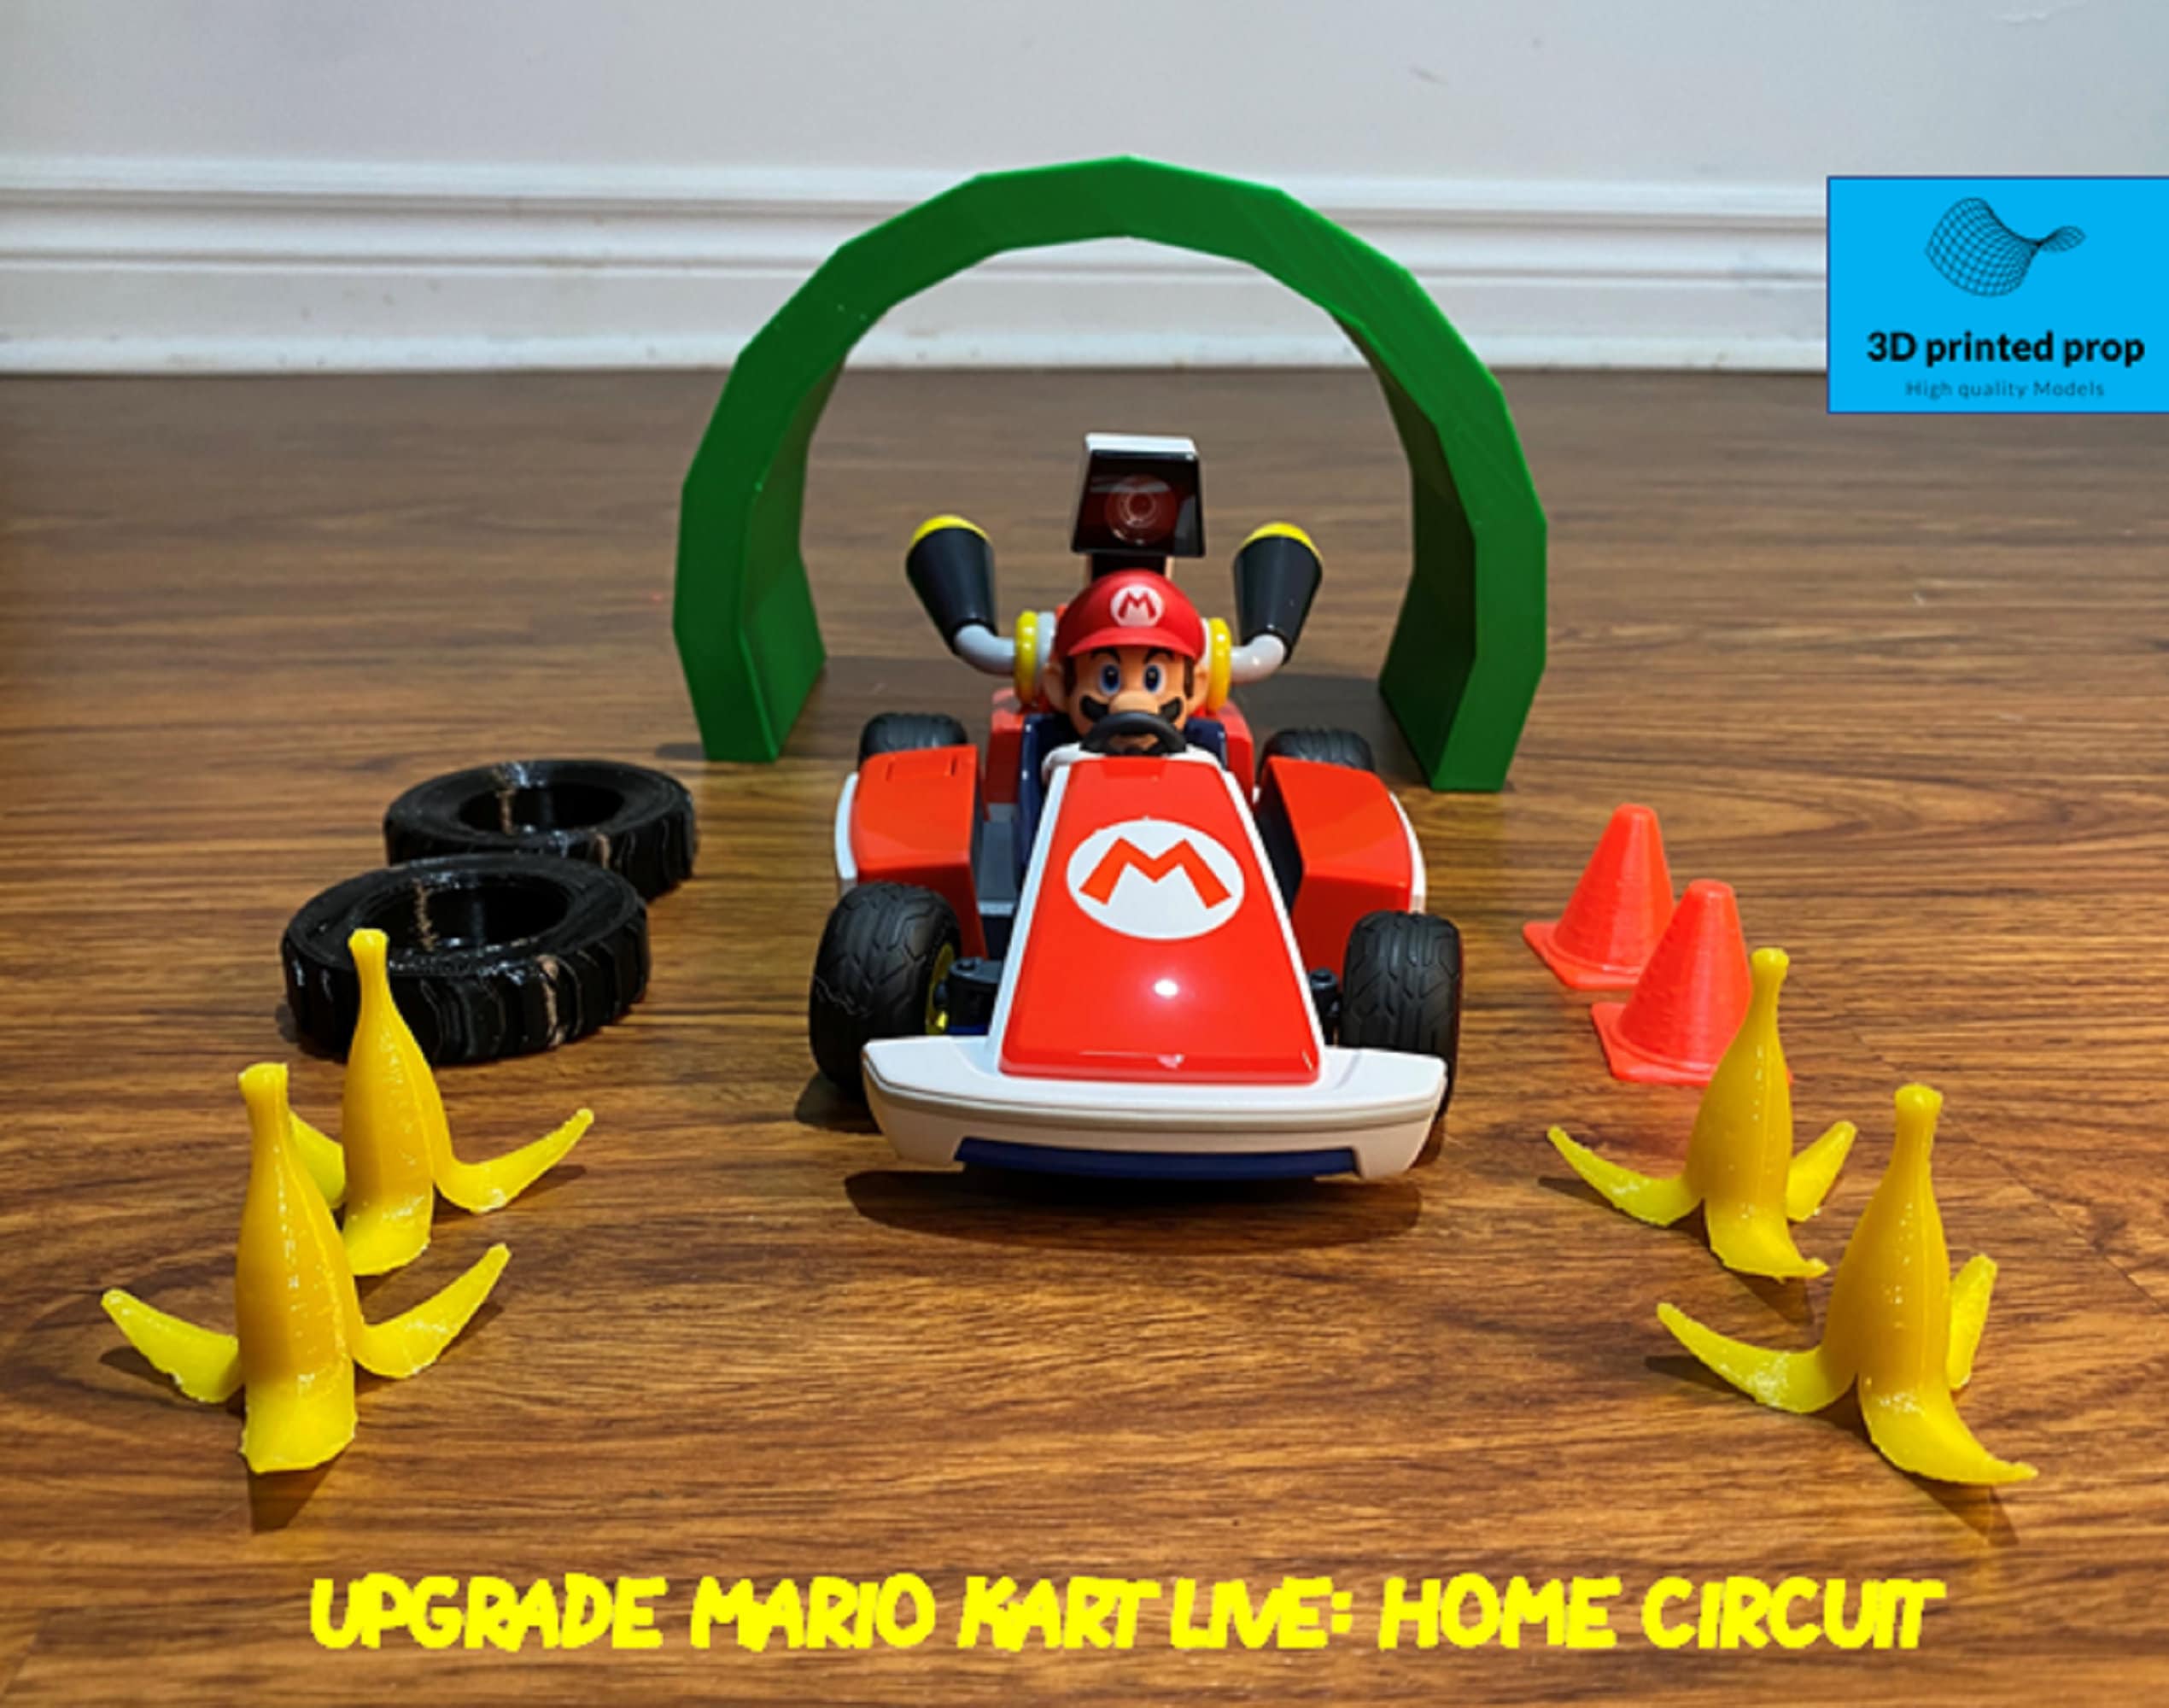 Mario Kart Live: Home Circuit Wall Mount & Charging Base Great for Game  Rooms -  Denmark